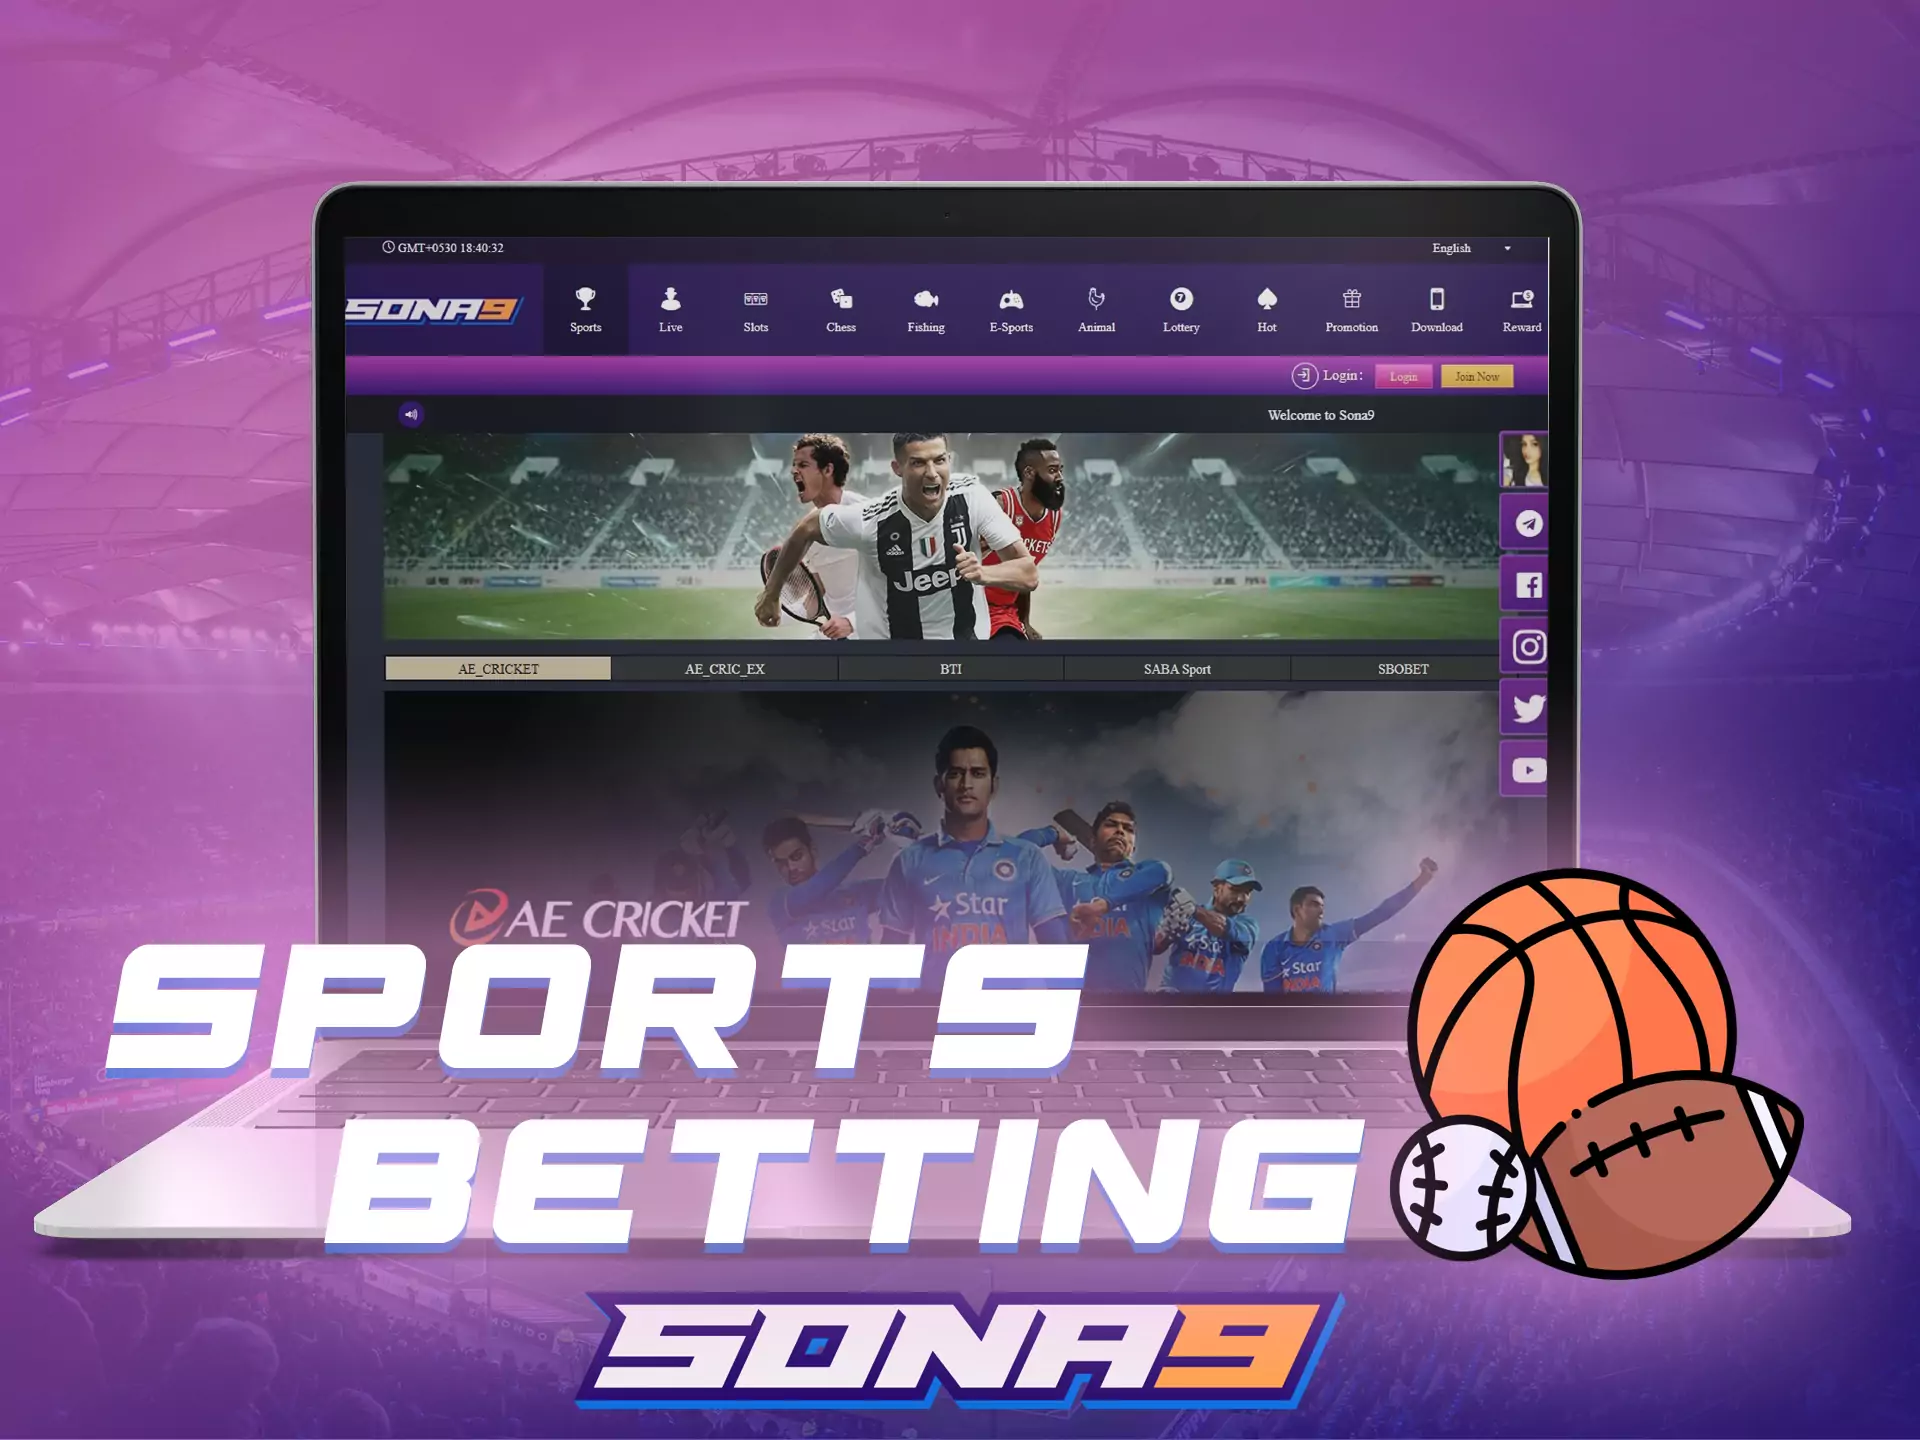 Betting on sports is the most popular activity for the users of Sona9.